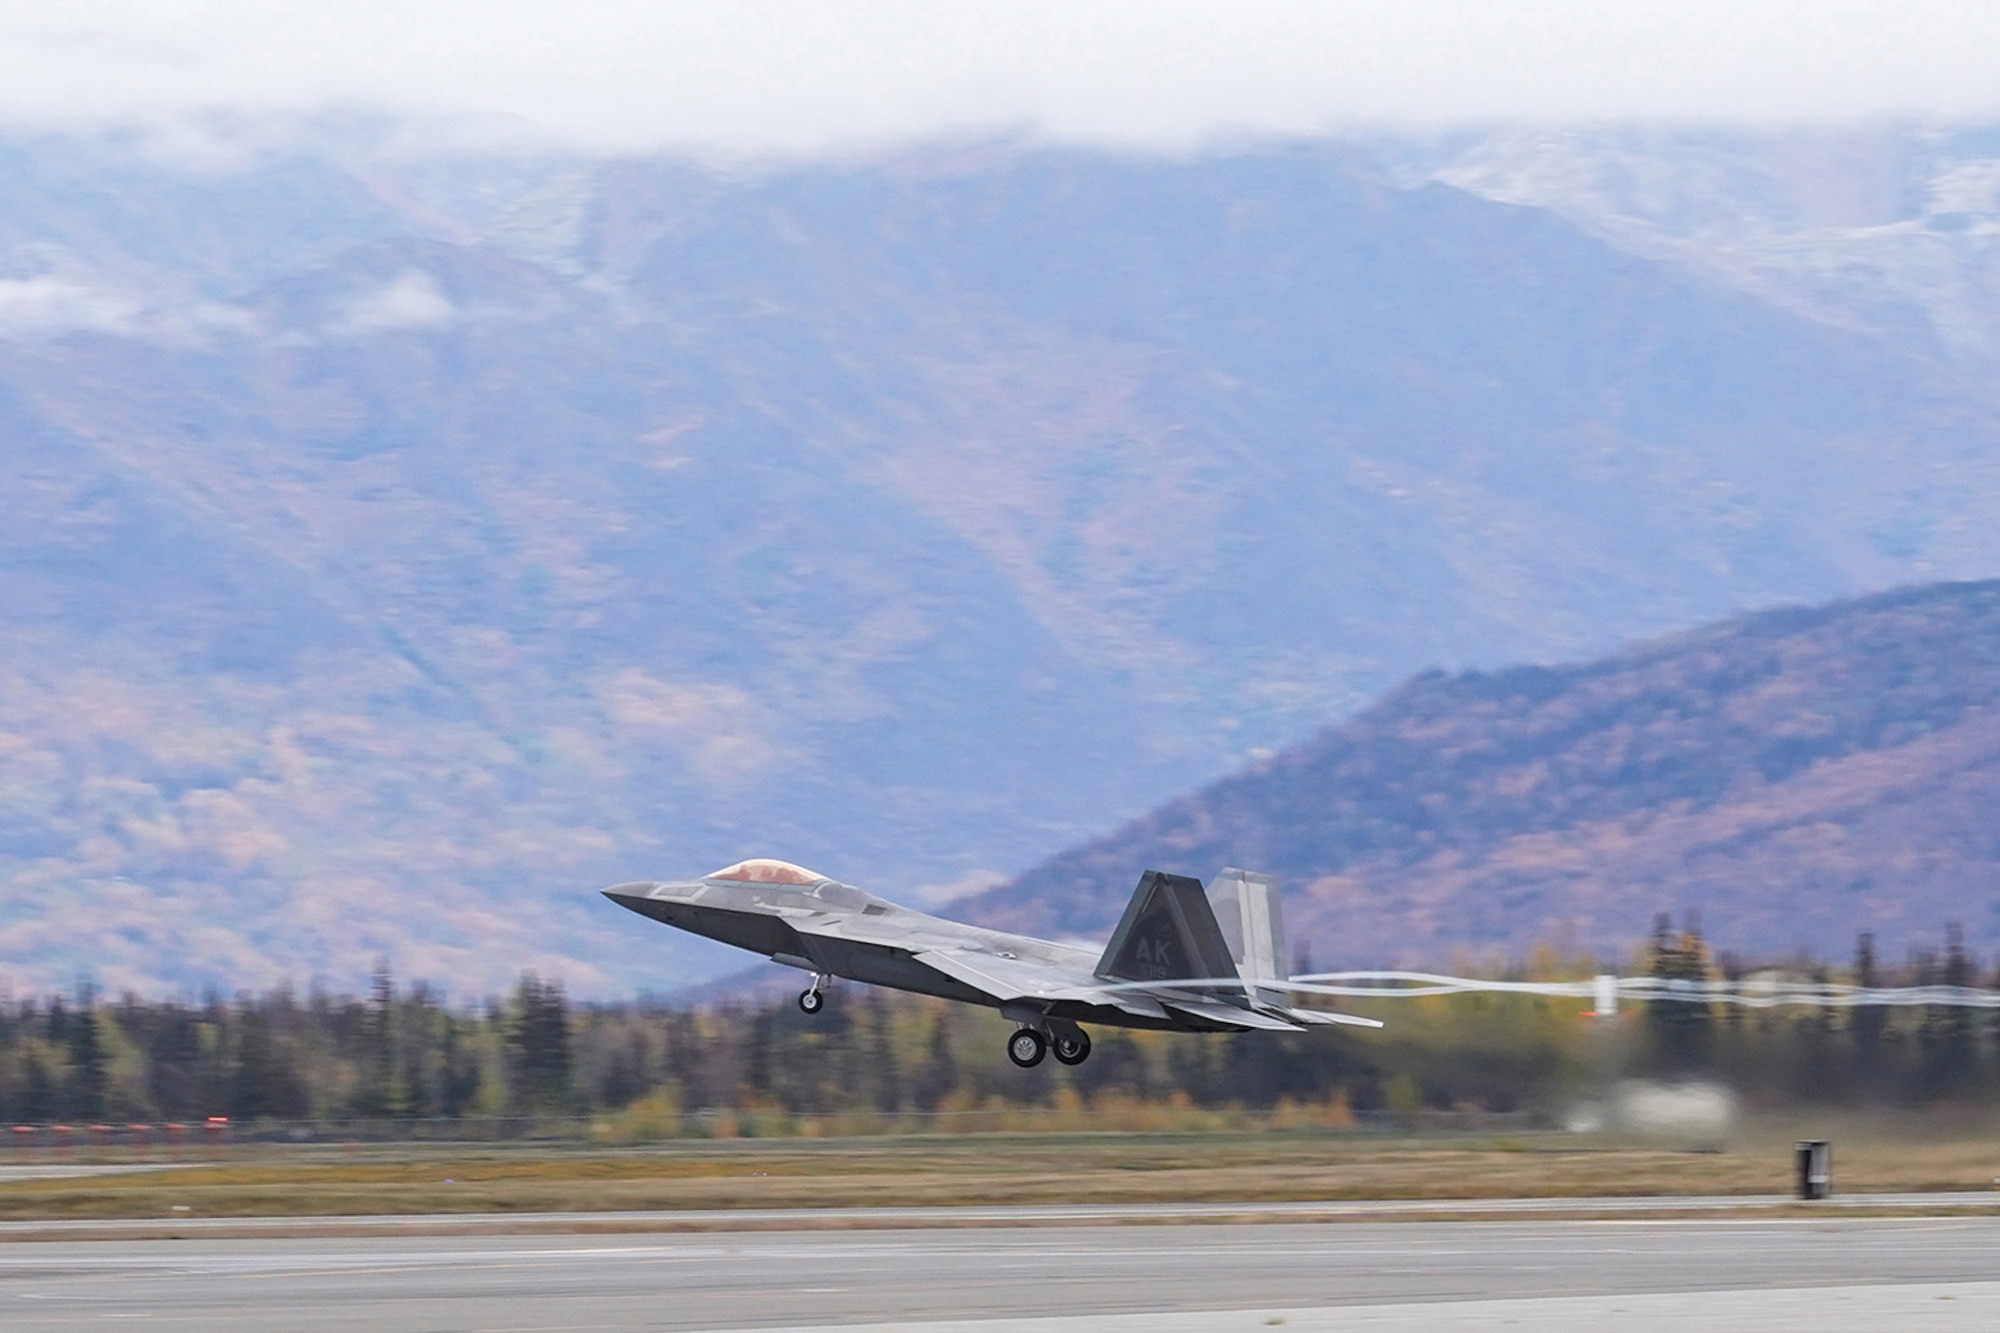 An F-22 Raptor of the 3rd Wing takes off from Joint Base Elmendorf-Richardson, Alaska, Oct. 2, 2019, while participating in the Polar Force 20-1 exercise. Polar Force 20-1 is designed to exercise multiple elements of the Agile Combat Employment (ACE) concept of operations, which include generating 5th Generation combat power from austere locations, command and control using non-traditional methods, and rapid airlift capabilities to sustain a forward operating location.  The ACE concept enables 3rd Wing to deliver lethal Airpower for America, even in a contested environment.